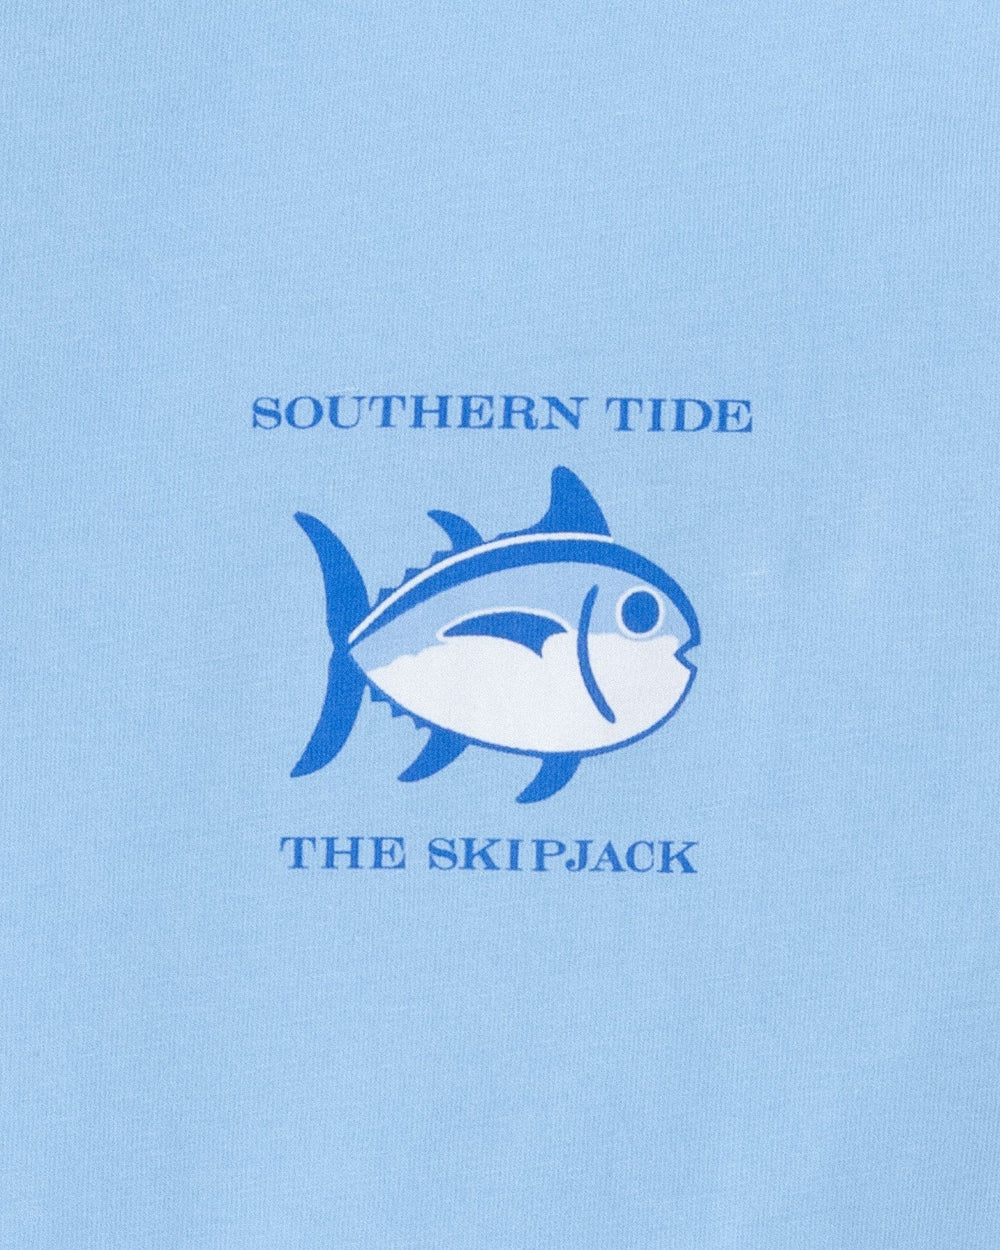 The detail of the Men's Blue Original Skipjack Short Sleeve T-Shirt by Southern Tide - Ocean Channel